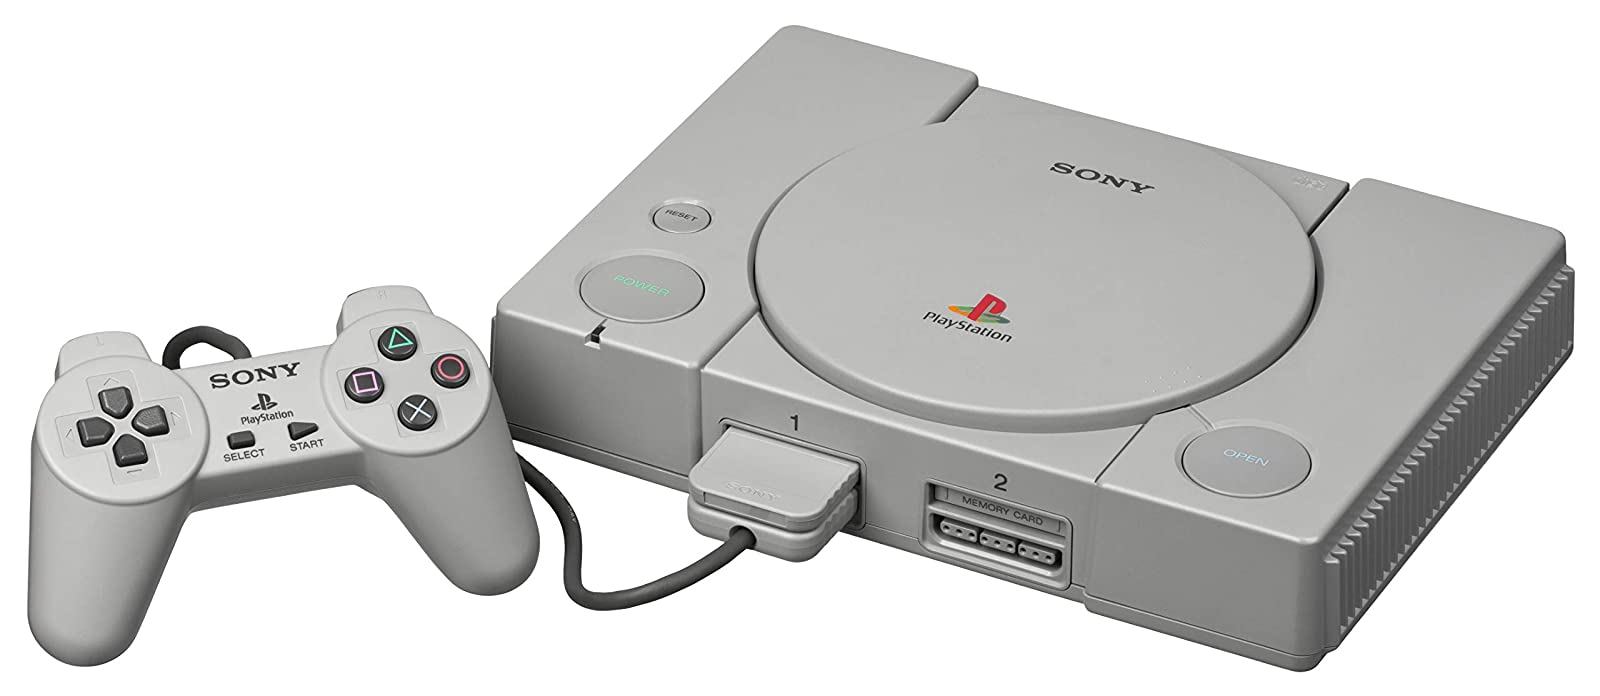 Restored Sony PlayStation 1 Console (Refurbished) - image 3 of 3